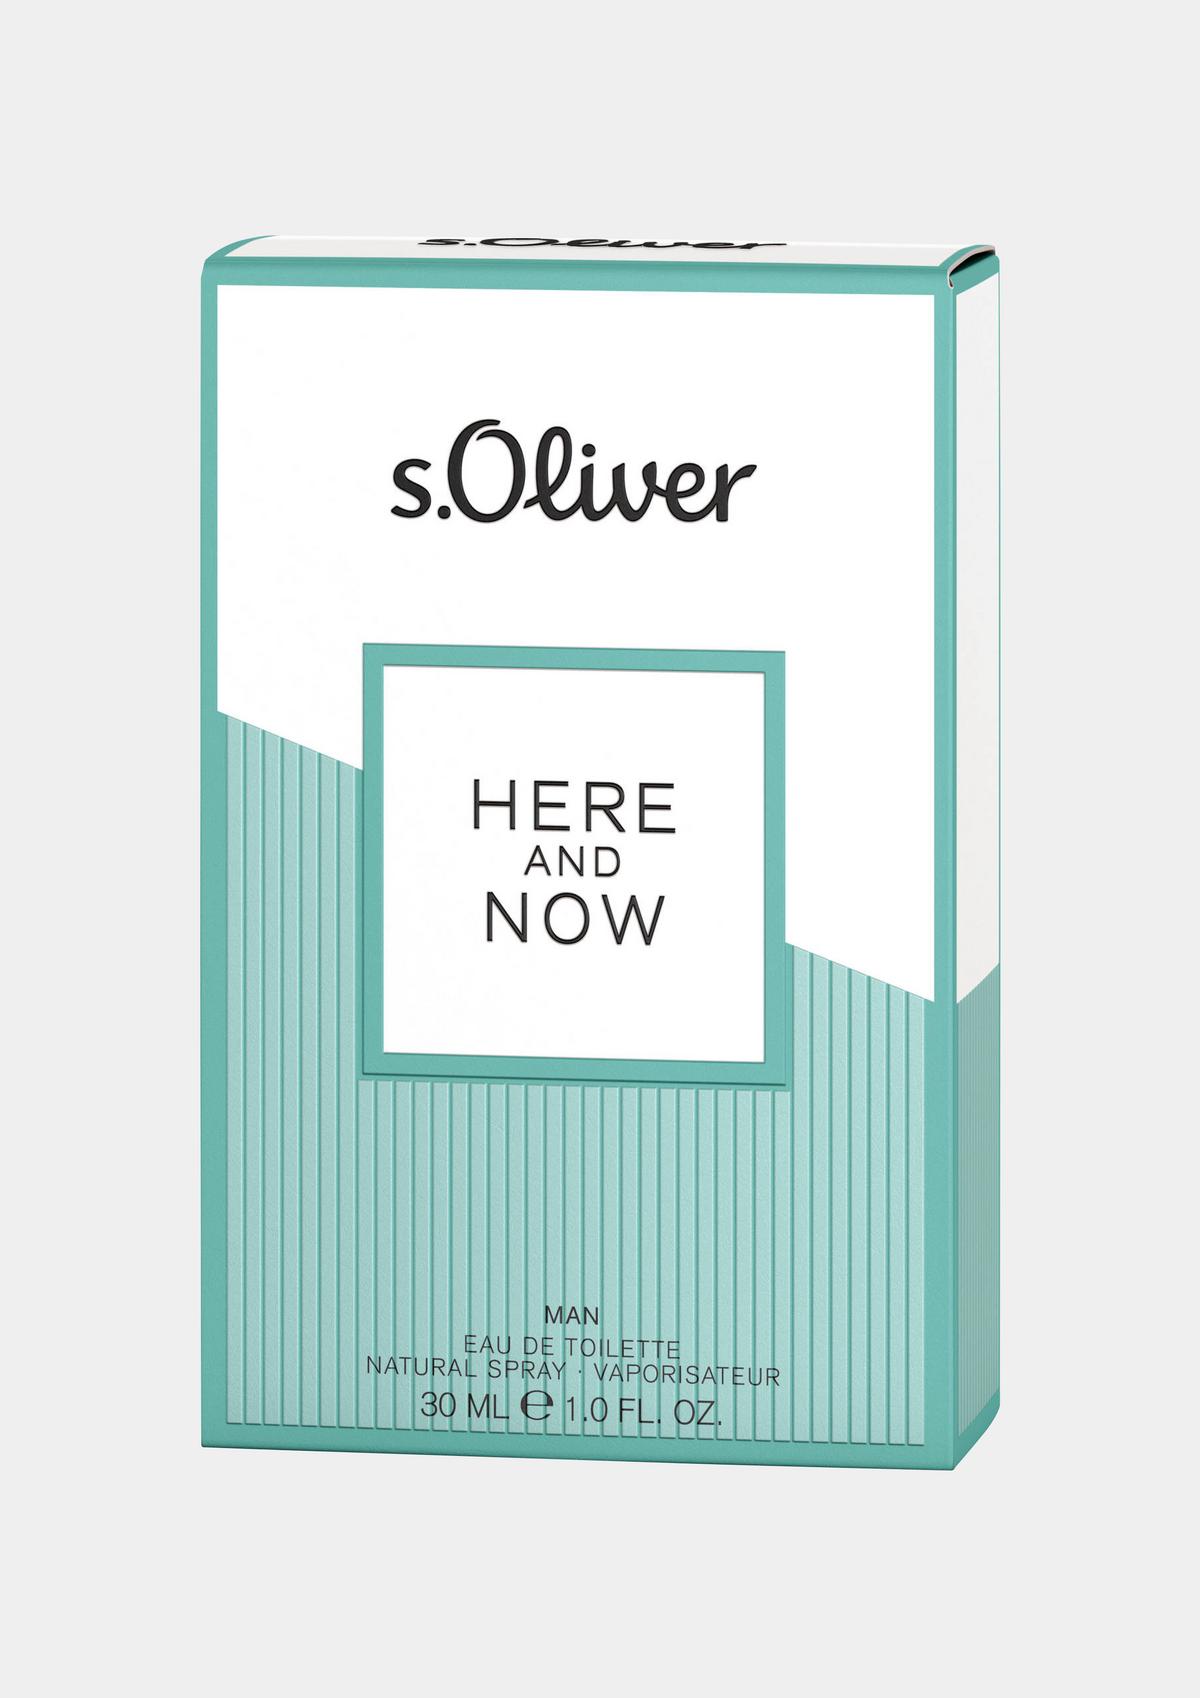 s.Oliver Toaletna voda Here And Now 30 ml